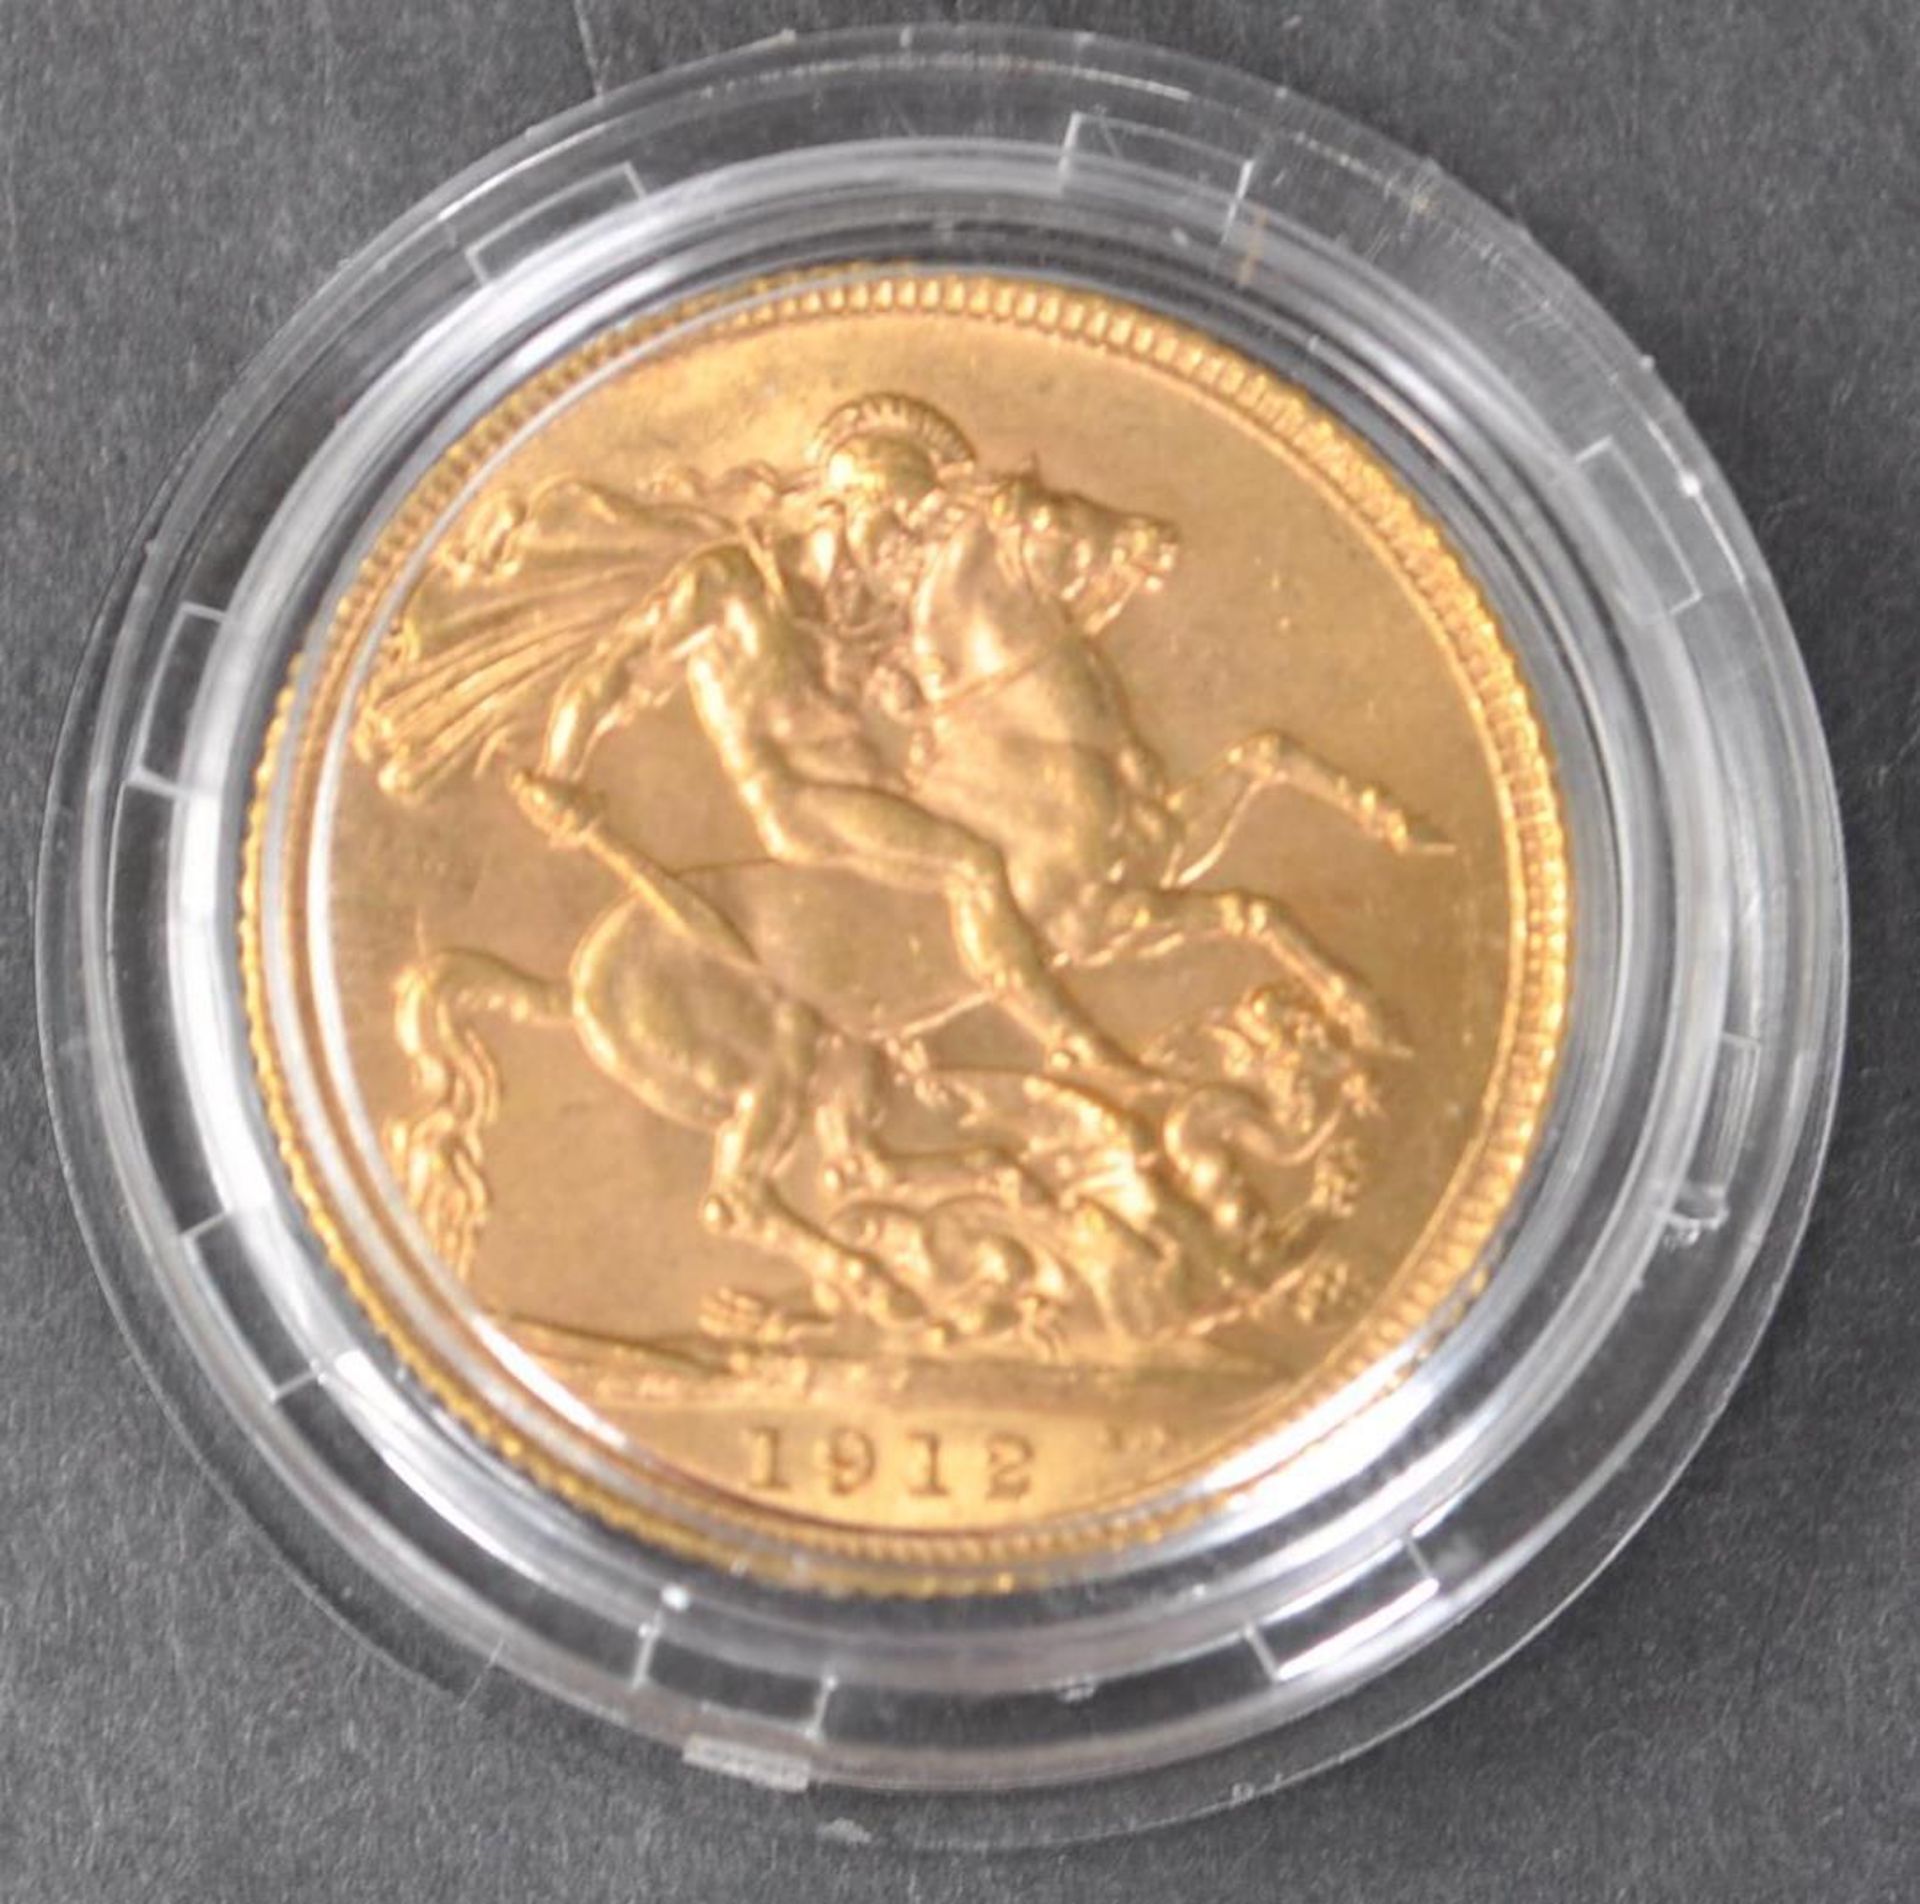 1912 GEORGE V 22CT GOLD SOVEREIGN COIN - Image 3 of 3